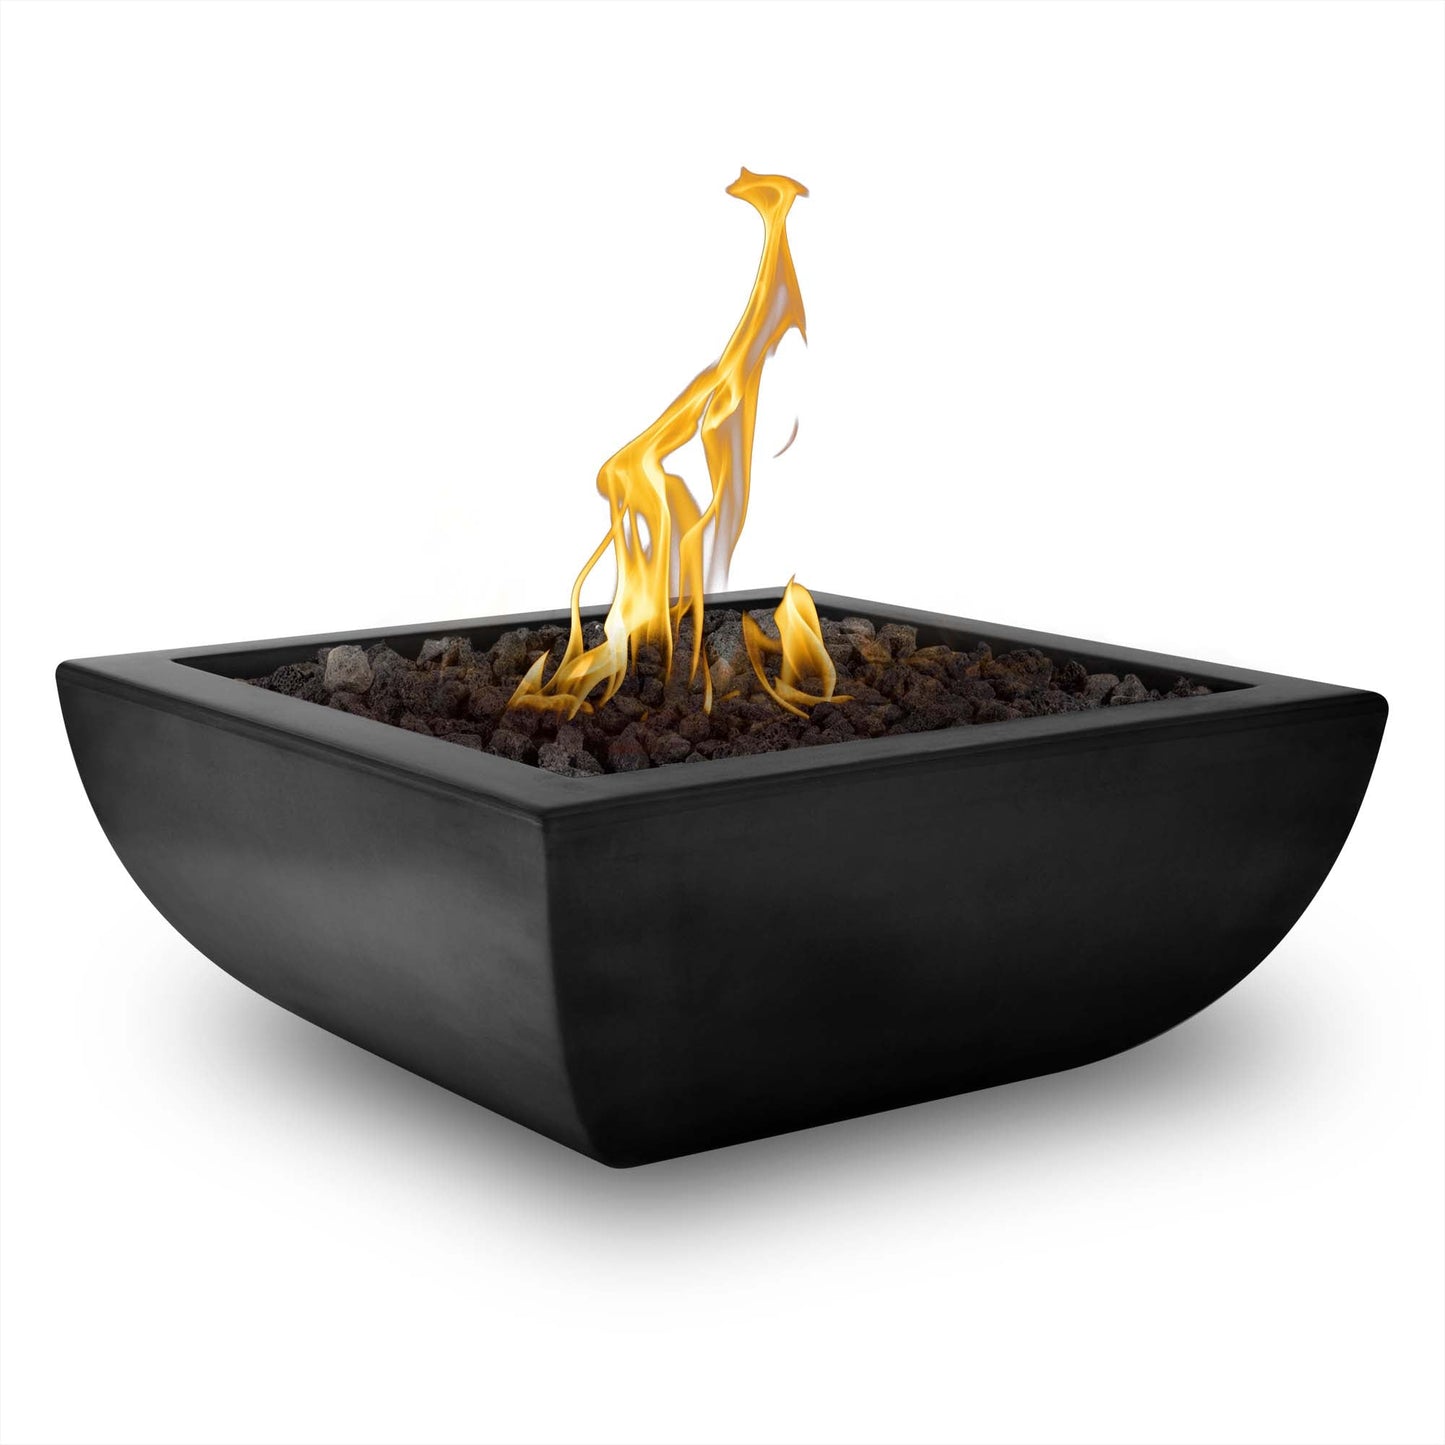 The Outdoor Plus Square Avalon 24" Brown GFRC Concrete Liquid Propane Fire Bowl with Match Lit with Flame Sense Ignition